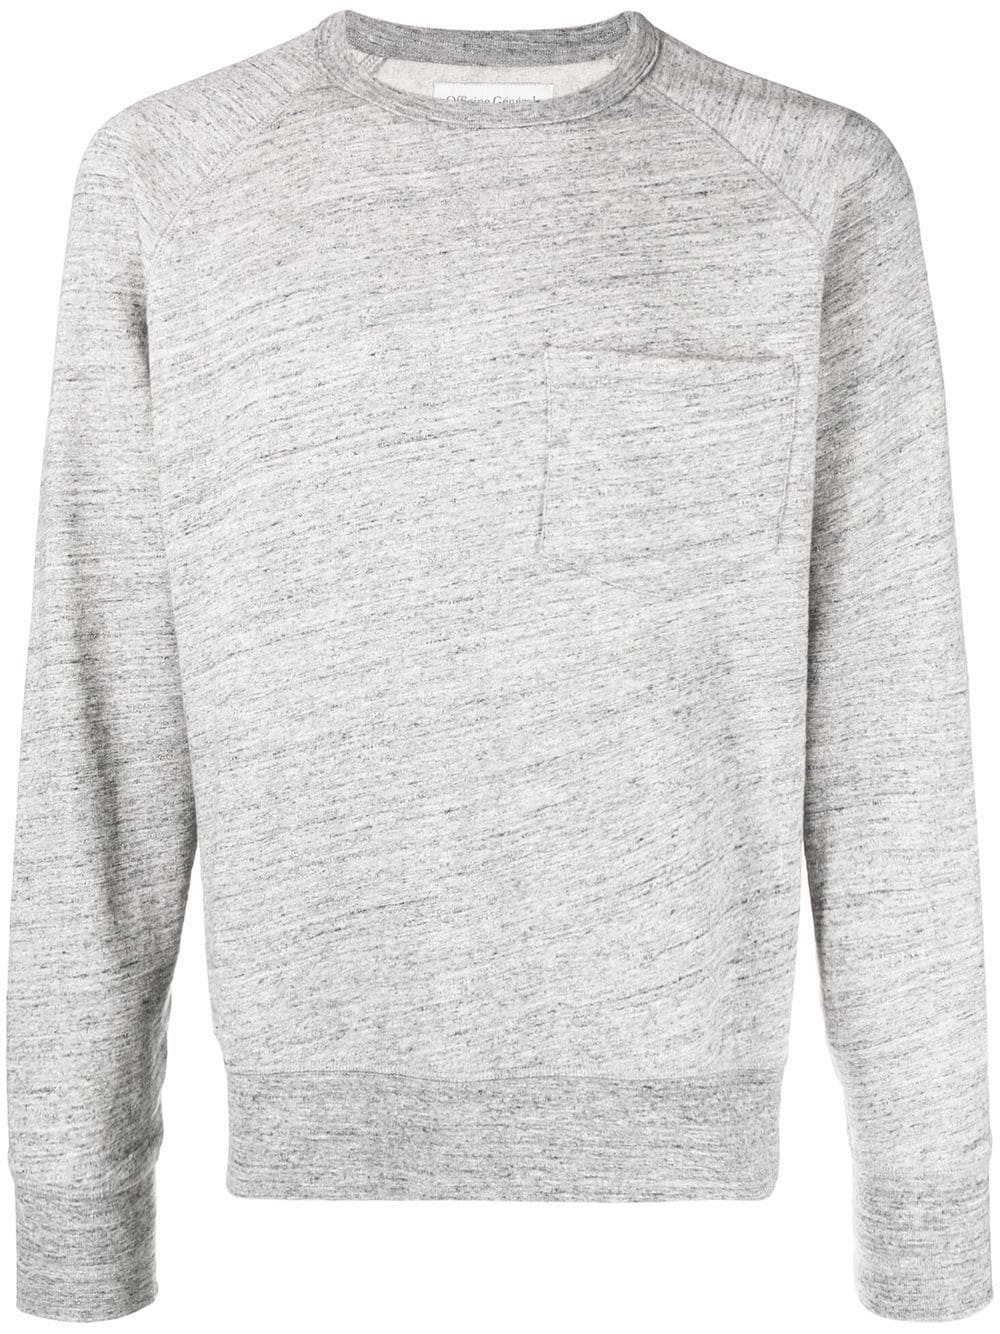 OFFICINE GENERALE CHEST PATCH POCKET SWEATER